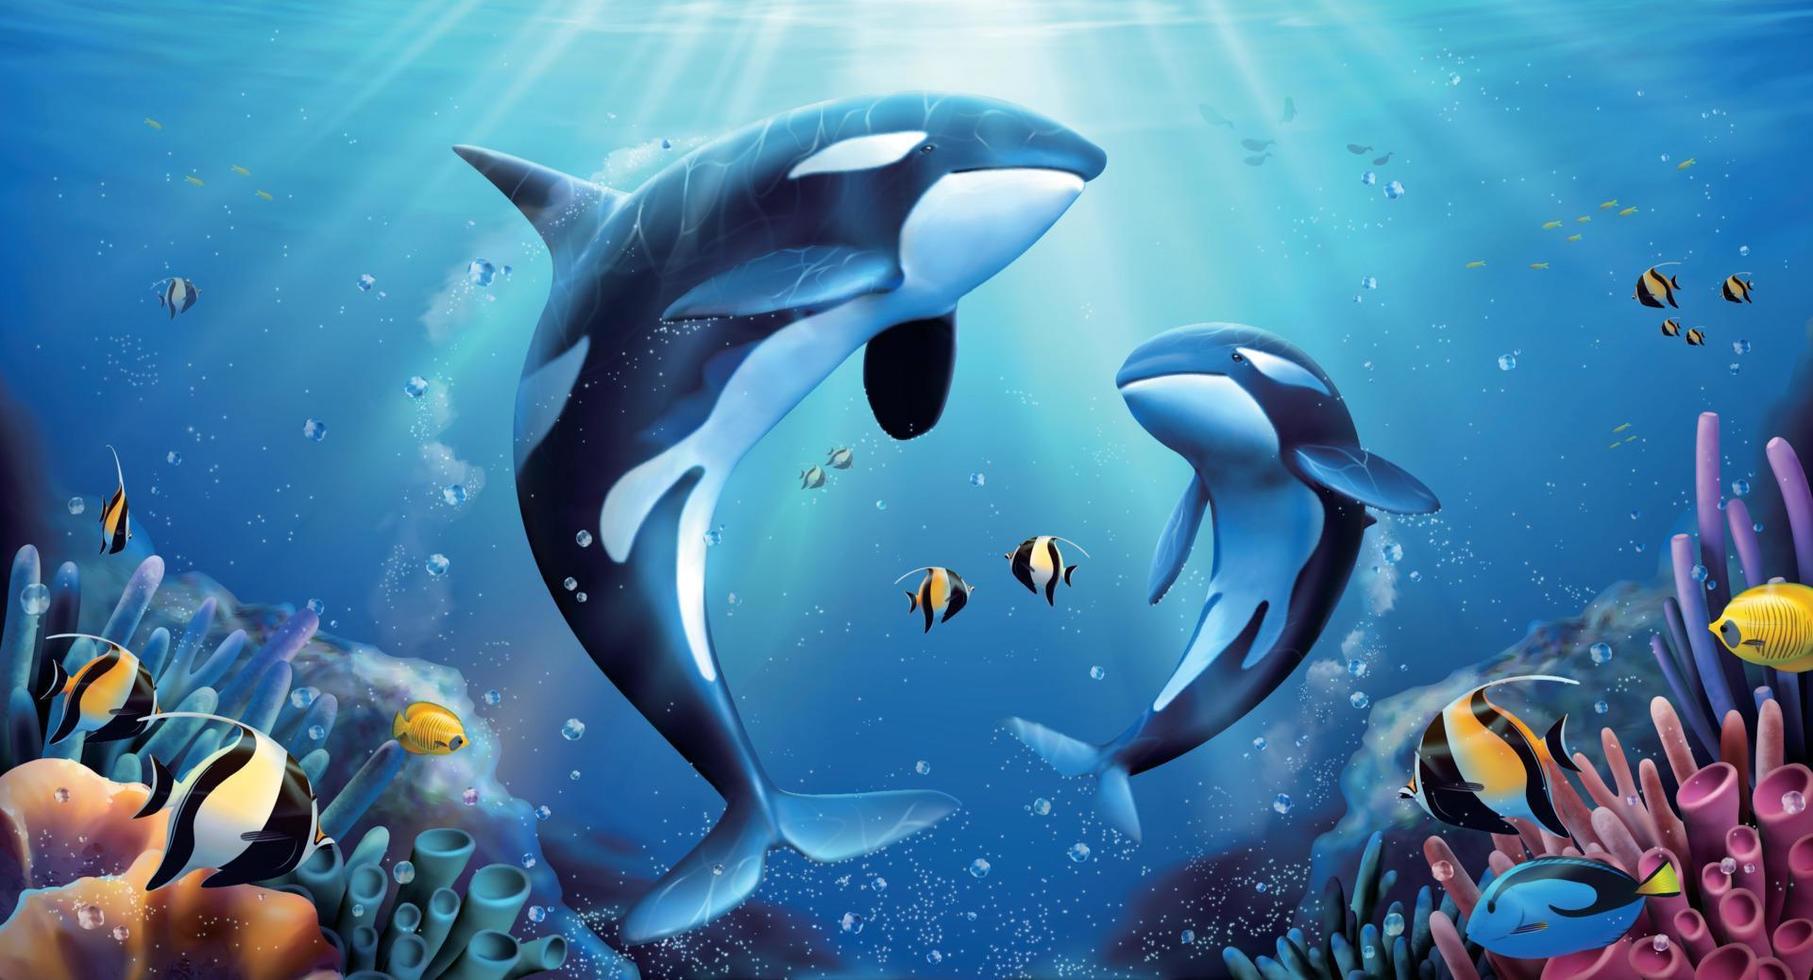 Adorable killer whales family looking up towards sea surface with beautiful coral reefs and tropical fish around them, marine life 3d illustration vector